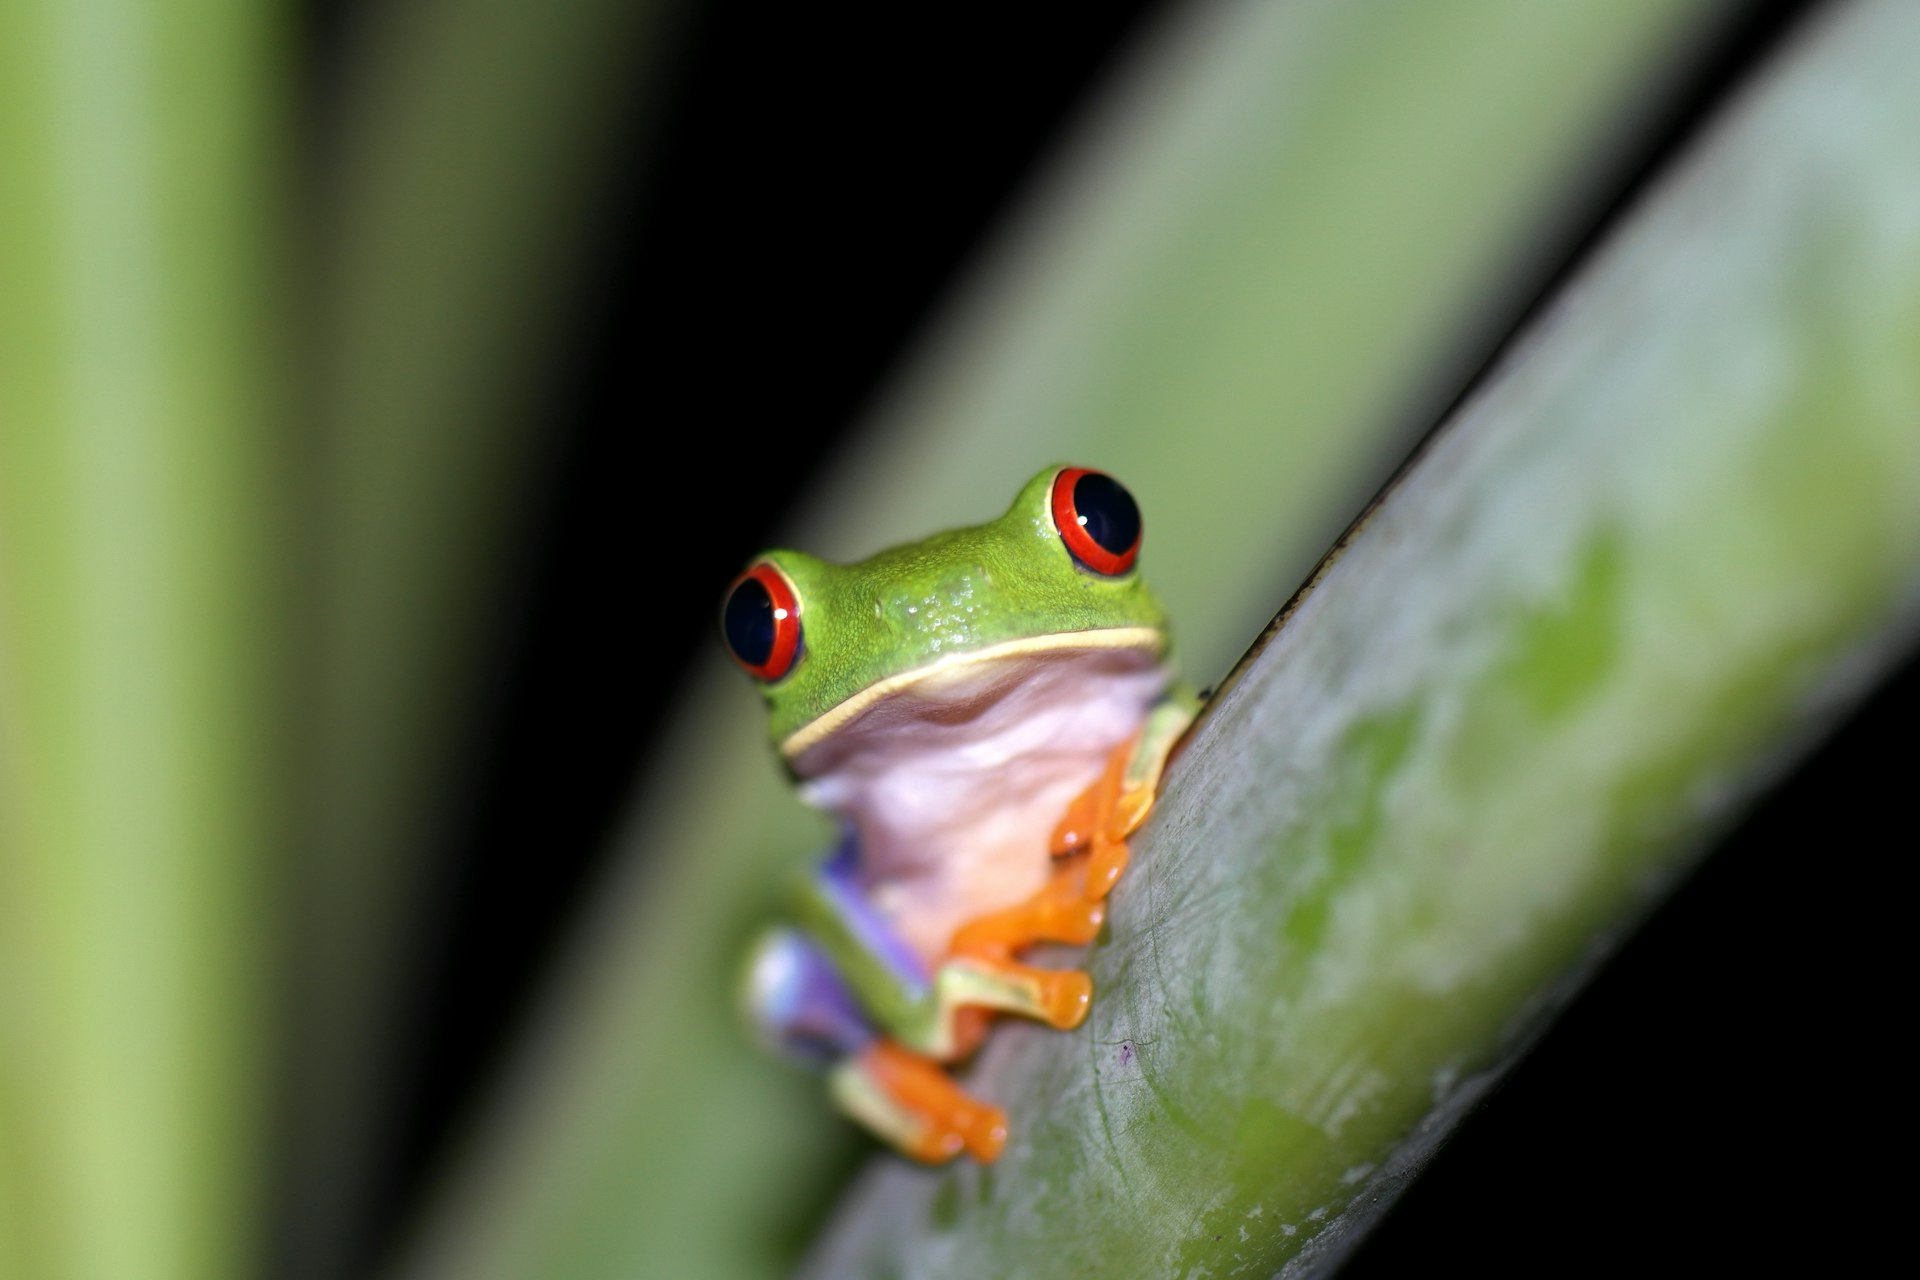 A green, white and orange tree frog sitting on a leaf stem at Tortuguero National Park in Costa Rica